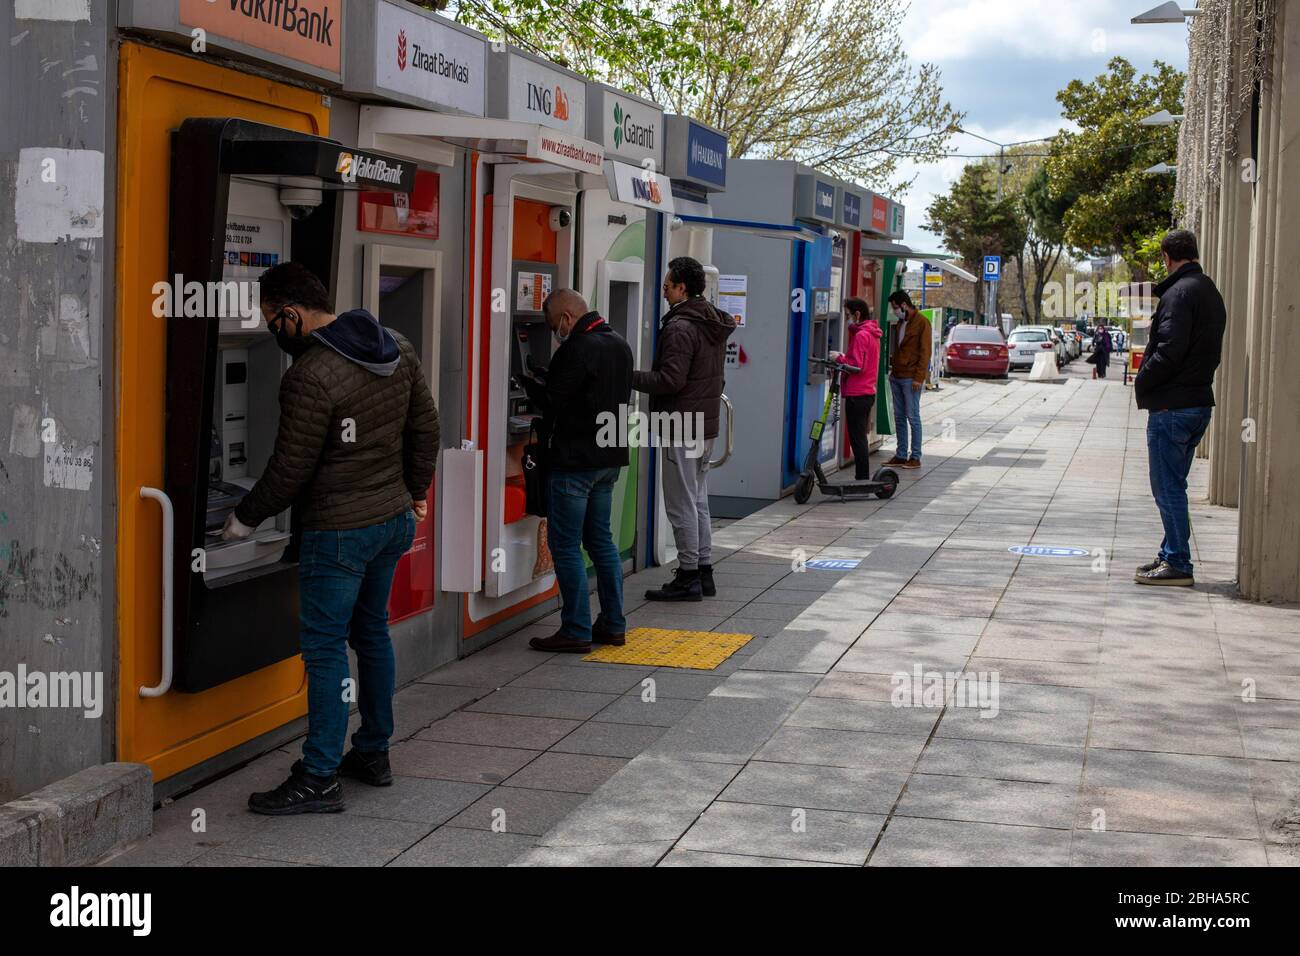 Istanbul, Turkey. 22nd Apr, 2020. People withdrawing money from ATMs from Bakirkoy square before four days curfew during coronavirus days. Bakirkoy is a neighbourhood, municipality and crowded district on the European side of Istanbul. Turkey began enforcing a four-day curfew in 31 provinces as of midnight April 22 to prevent the spread of the novel coronavirus. As of April 22 Turkey's coronavirus death toll rises to 2,376 as cases top 98,000. Credit: Tolga Ildun/ZUMA Wire/Alamy Live News Stock Photo